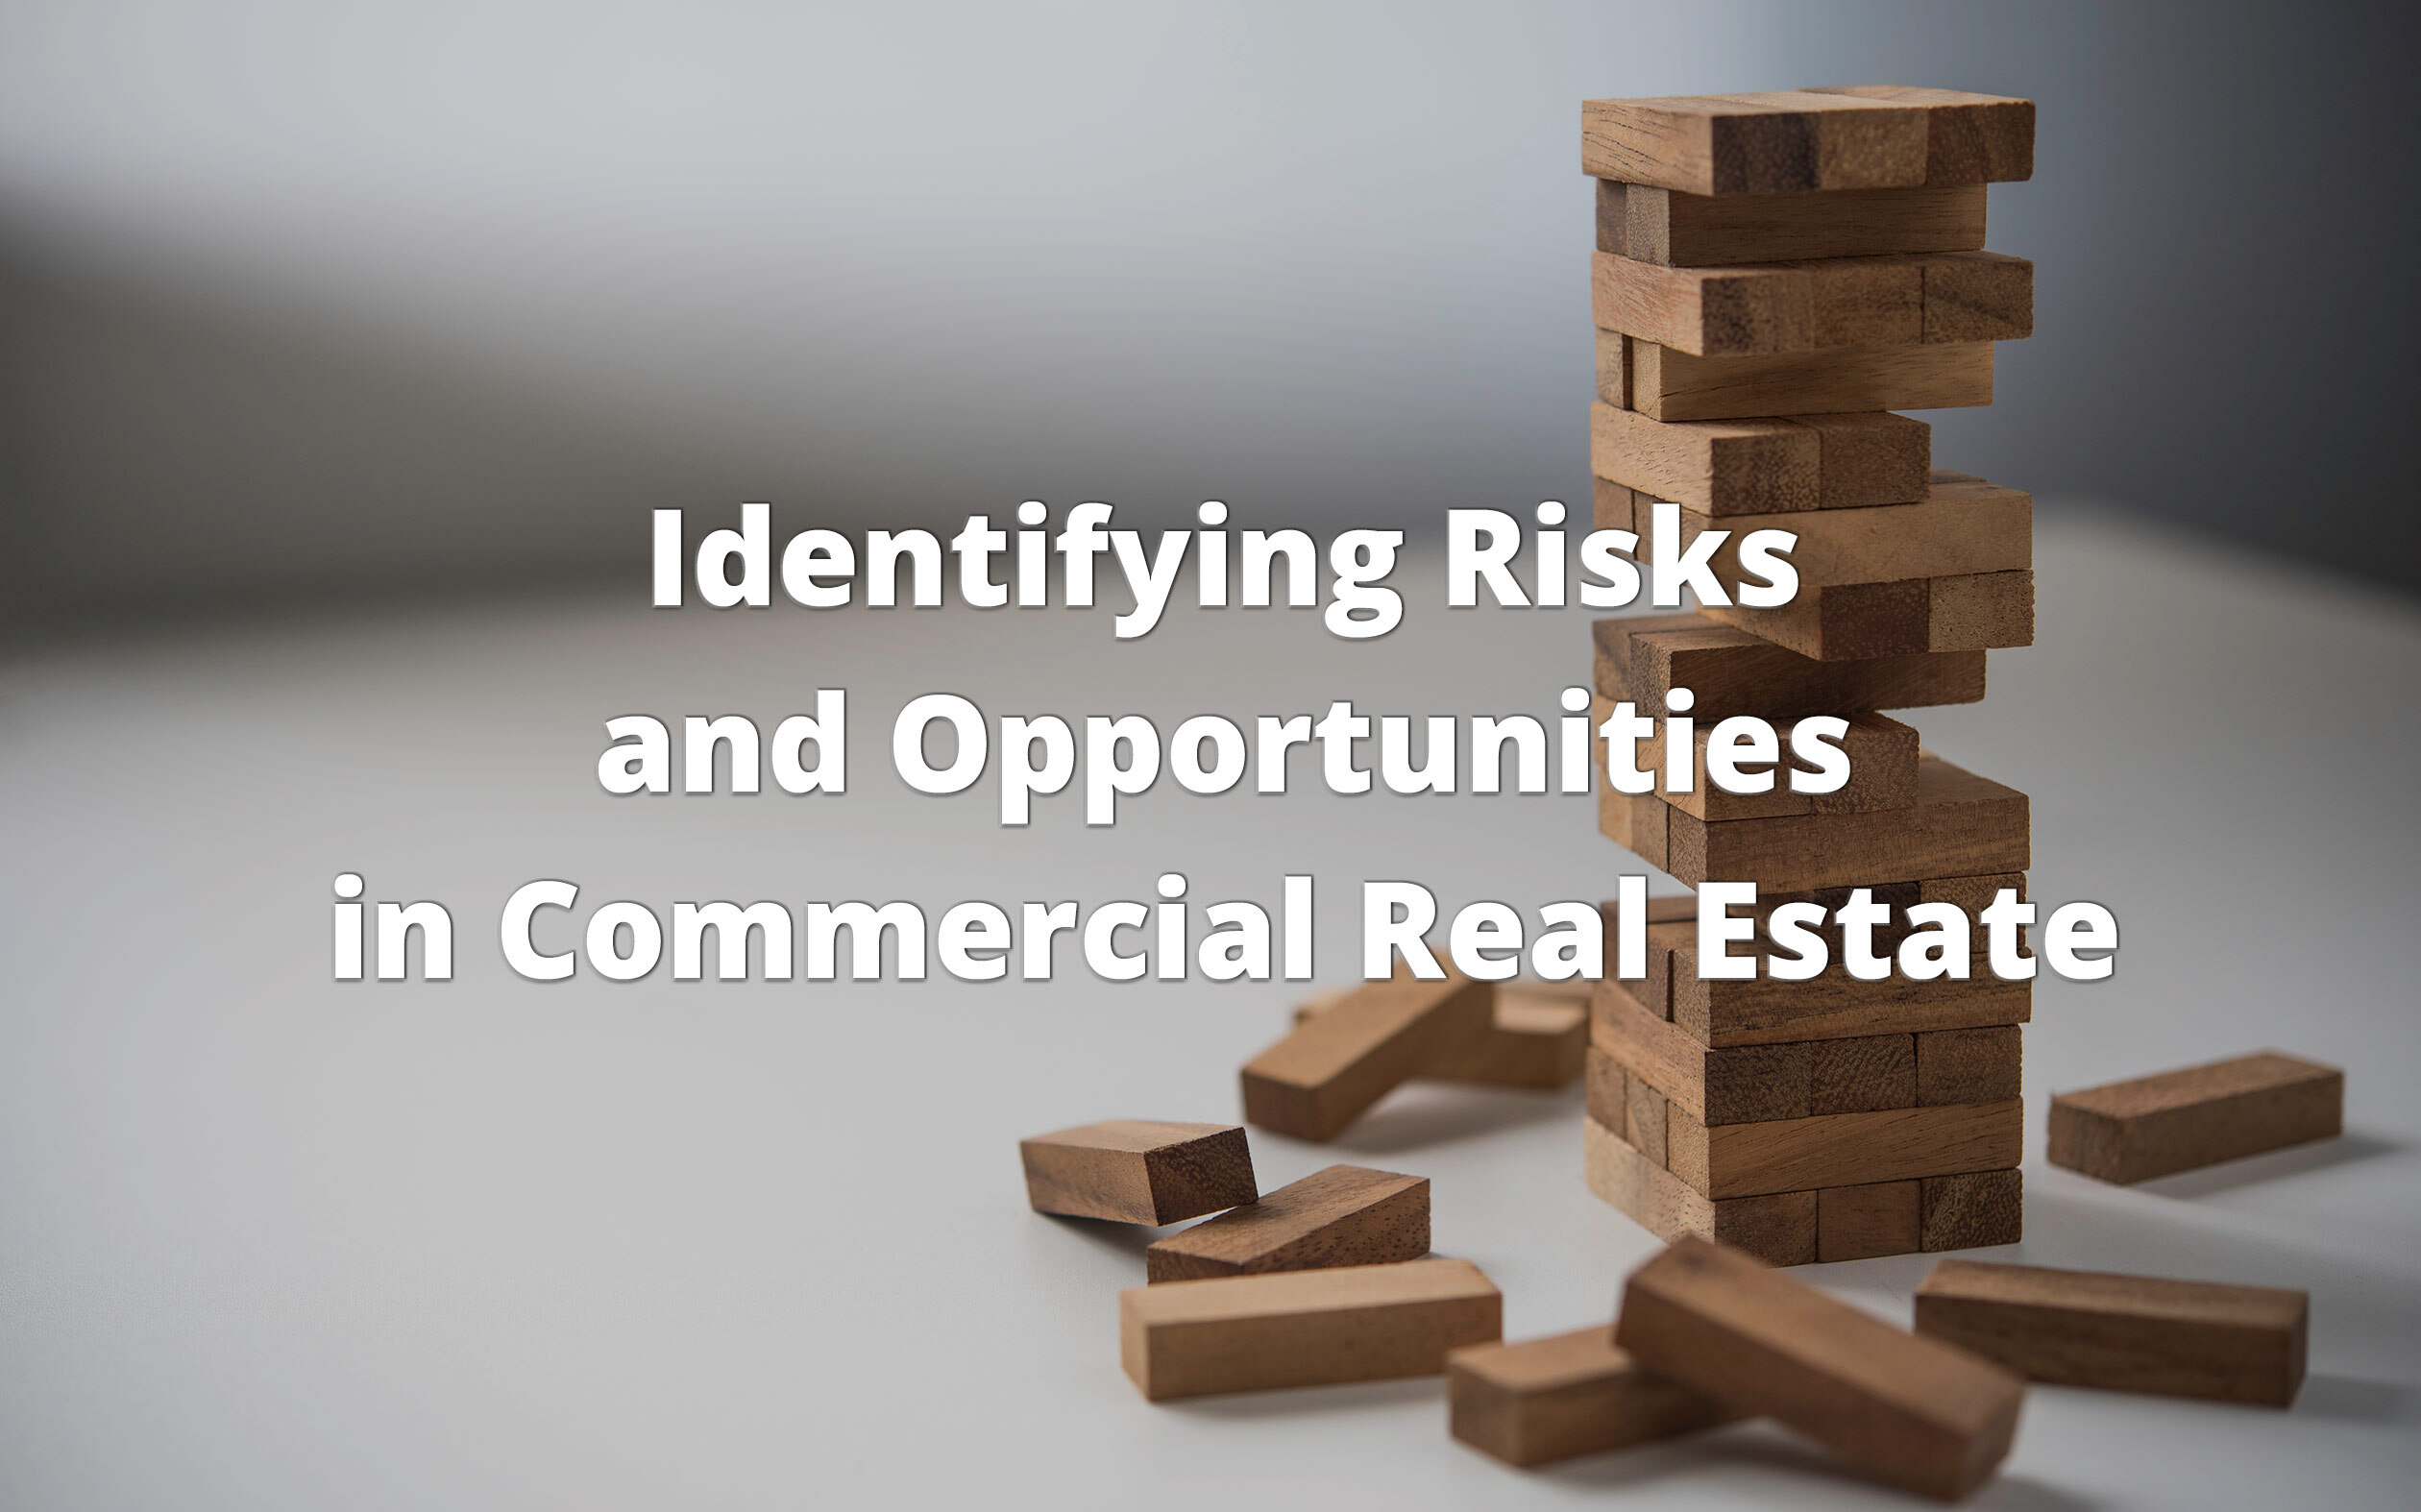 Identiying Risks and Opportunities in Commercial Real Estate